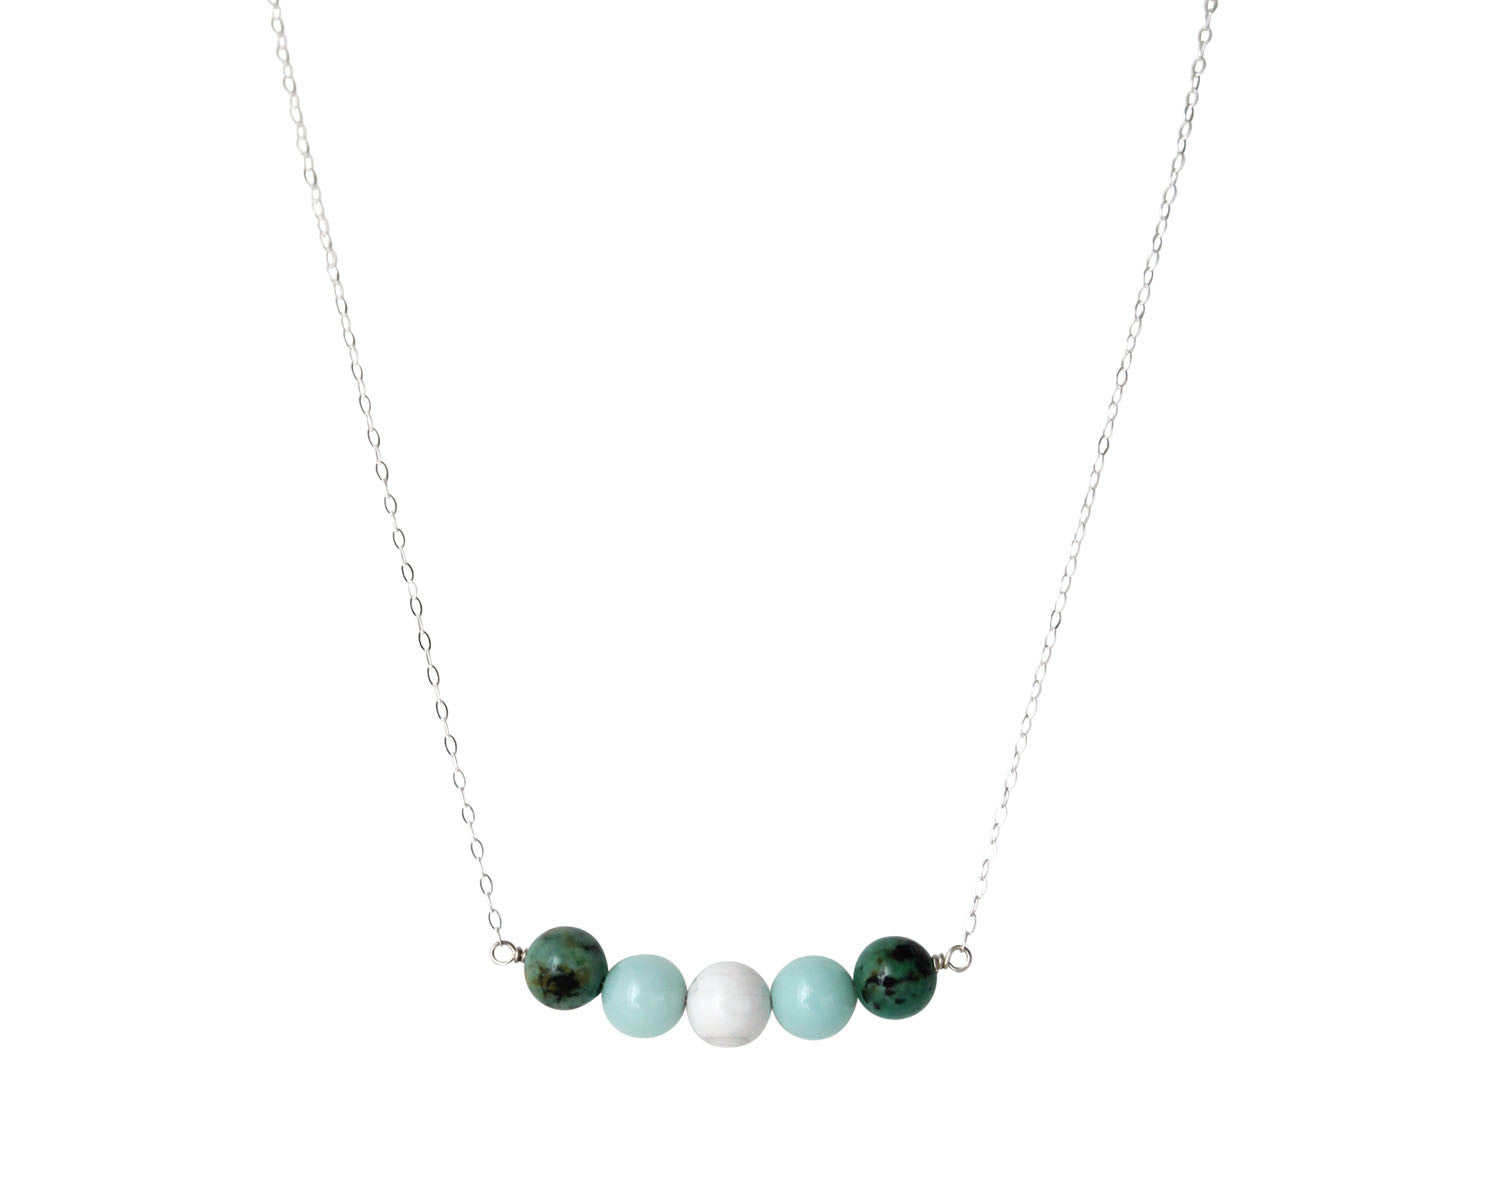 Focus Bliss Necklace